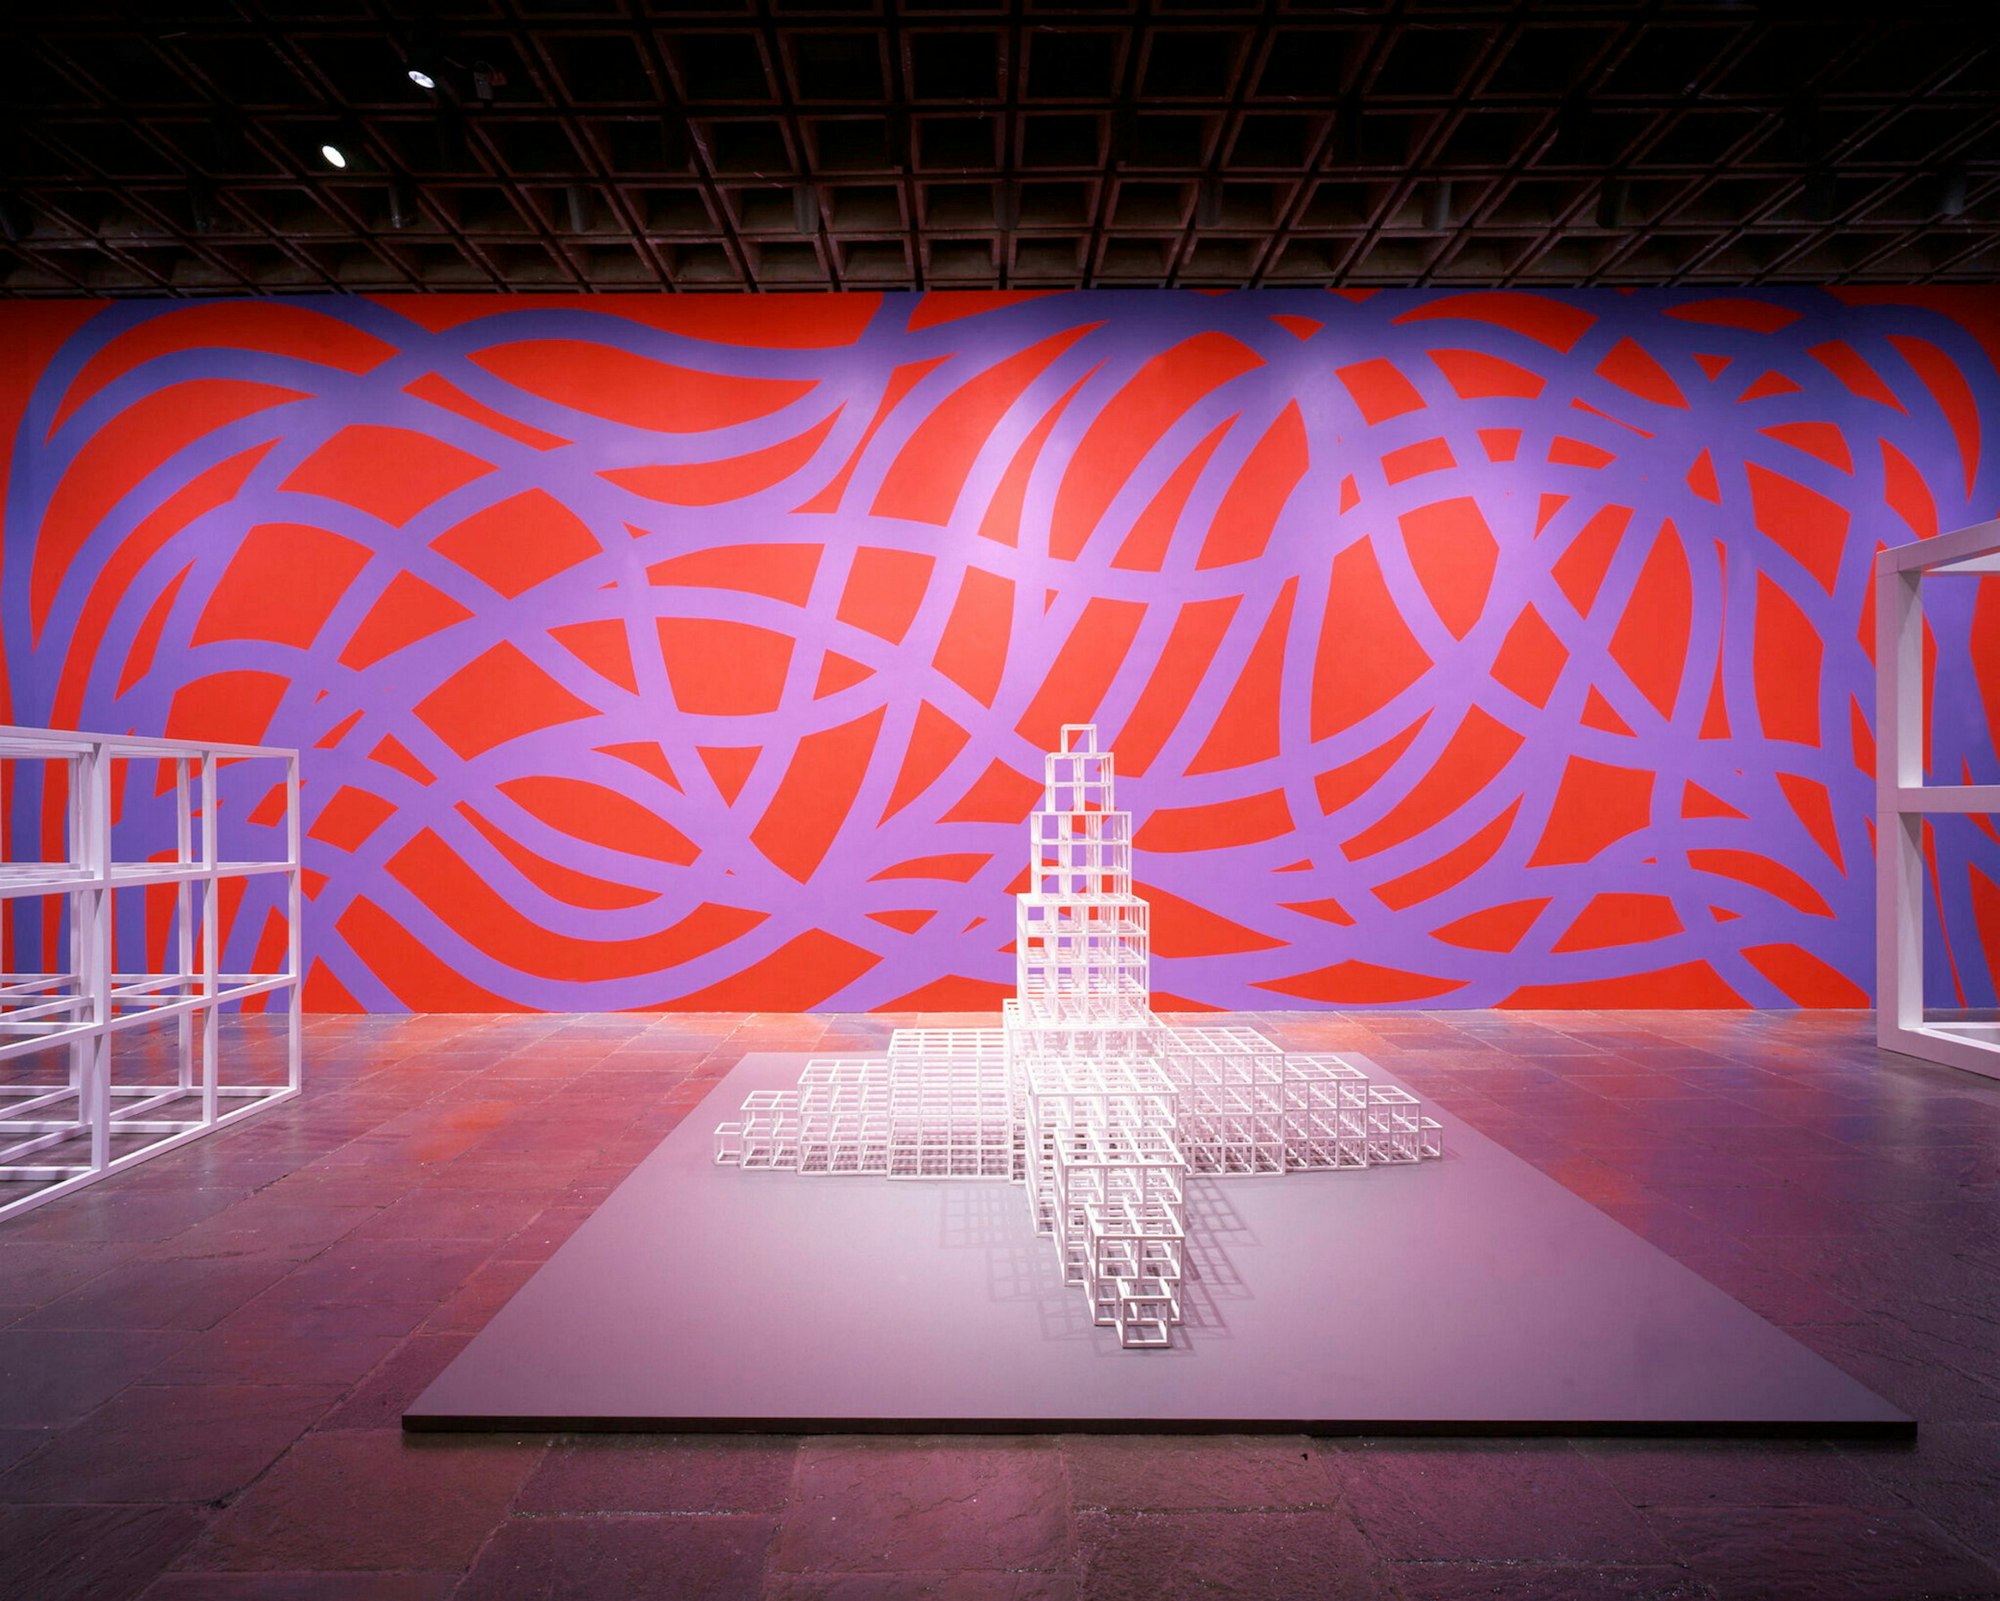 Installation view of Sol LeWitt Wall drawing #955: loopy doopy (red and purple) 2000, acrylic paint, first drawn by: Paolo Arao, Nicole Awai, Hidemi Nomura, Jean Shin, Frankie Woodruff, first installation: Whitney Museum of American Art, New York, November 2000 © Estate of Sol LeWitt